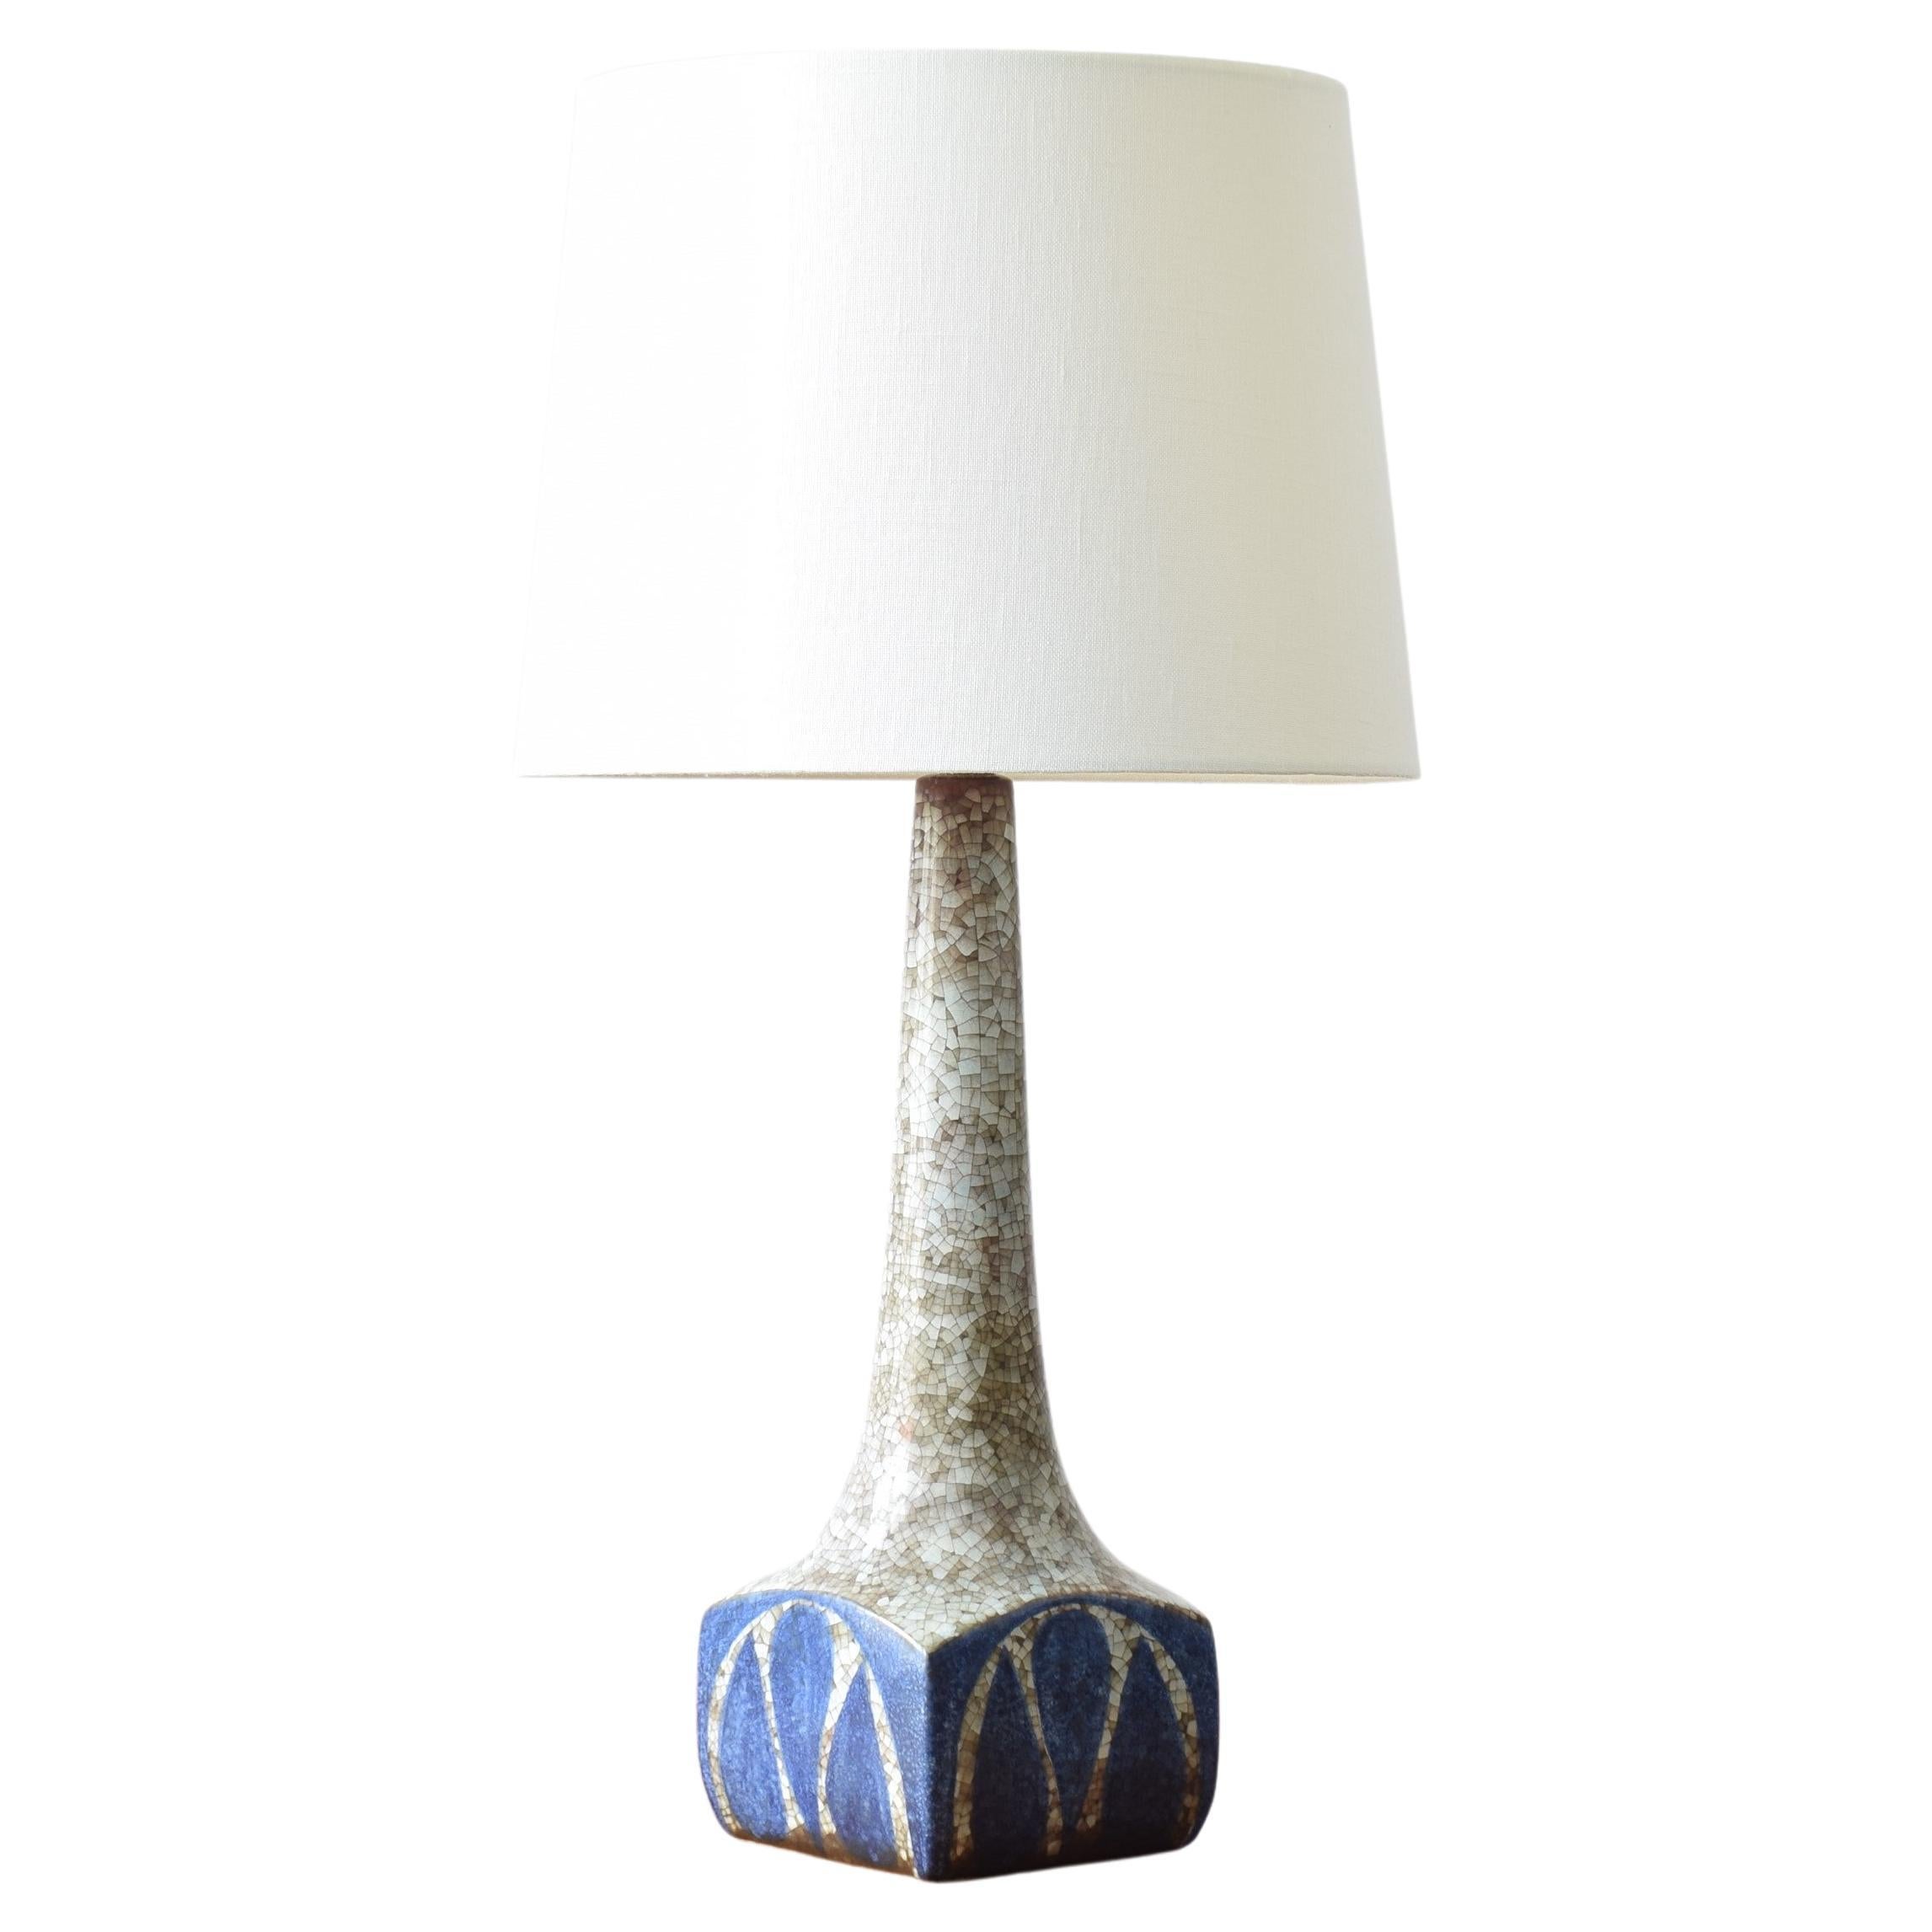 Danish Tall Ceramic Table Lamp Blue Persia Glaze, Marianne Starck for MA&S 1960s For Sale